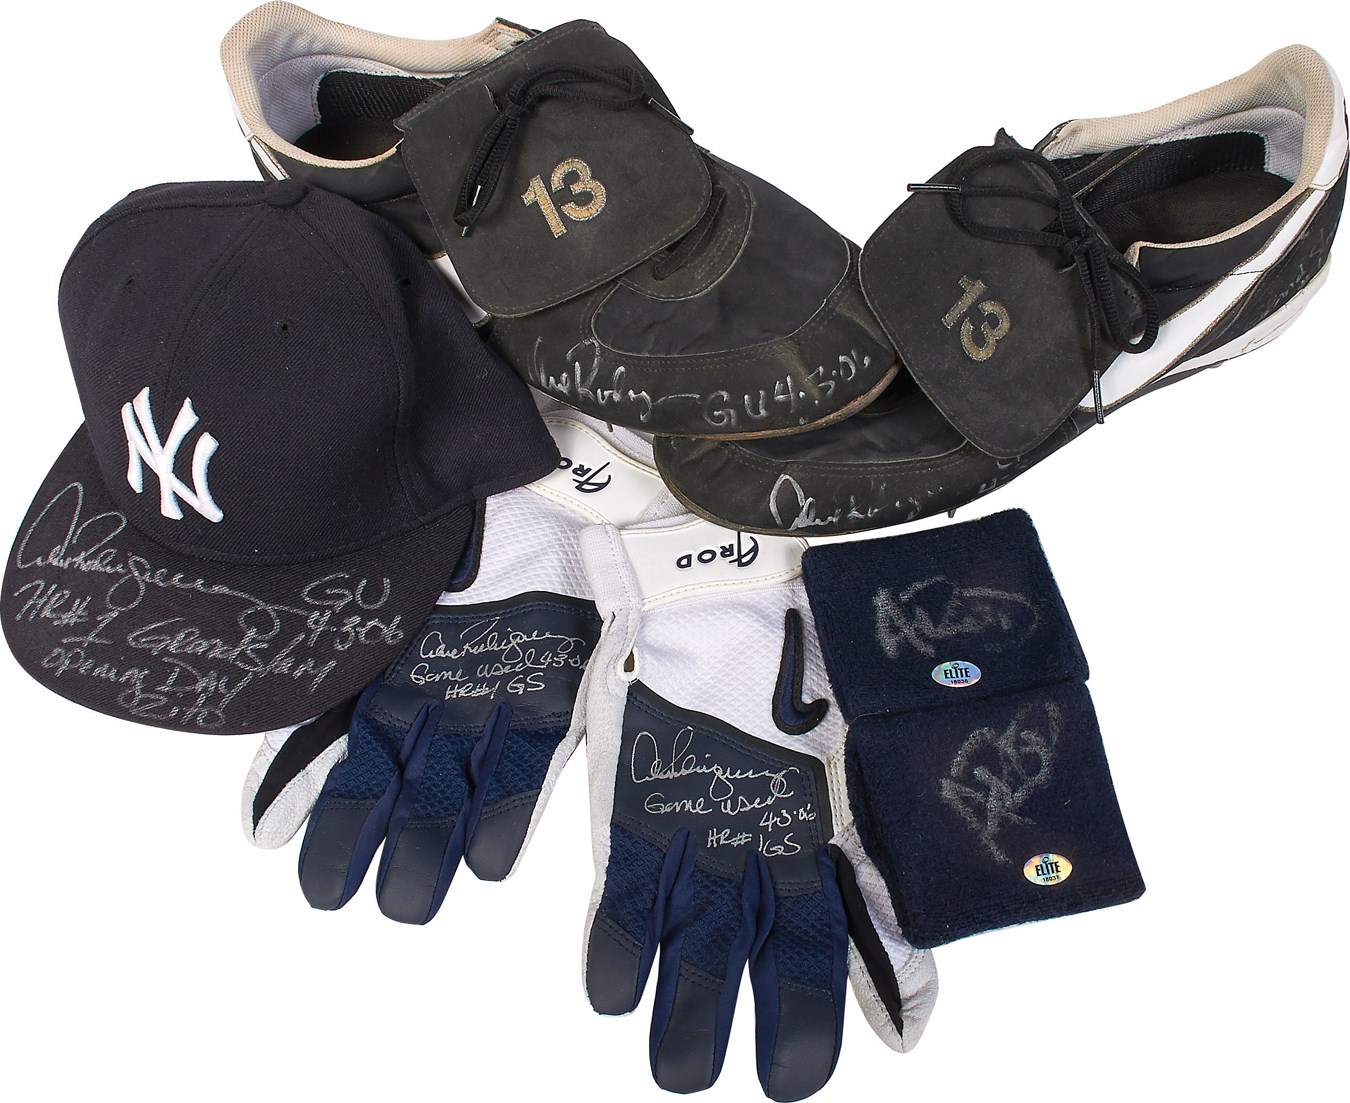 2006 Alex Rodriguez Game Used Opening Day "Grand Slam" Cap, Cleats & Gloves (Photomatched & A-Rod LOA)